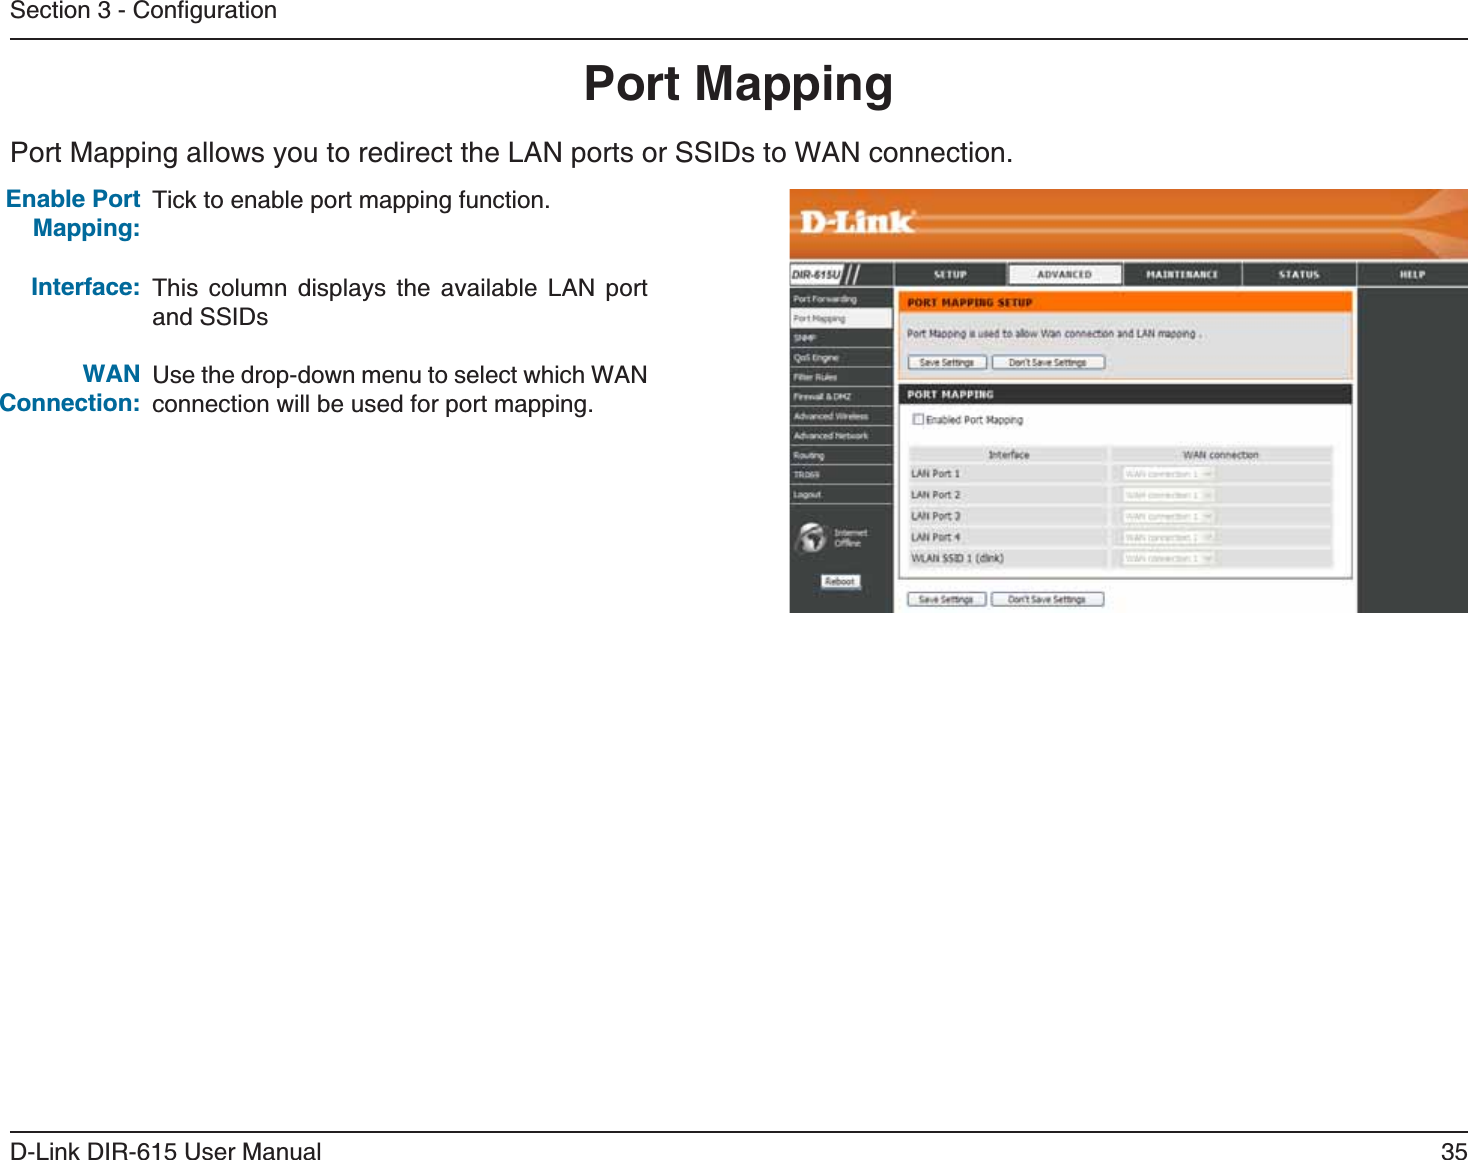 35D-Link DIR-615 User Manual5GEVKQP%QPſIWTCVKQP2QTV/CRRKPIPort Mapping allows you to redirect the LAN ports or SSIDs to WAN connection.Tick to enable port mapping function.This column displays the available LAN port and SSIDsUse the drop-down menu to select which WAN connection will be used for port mapping.&apos;PCDNG2QTV/CRRKPI+PVGTHCEG9#0%QPPGEVKQP